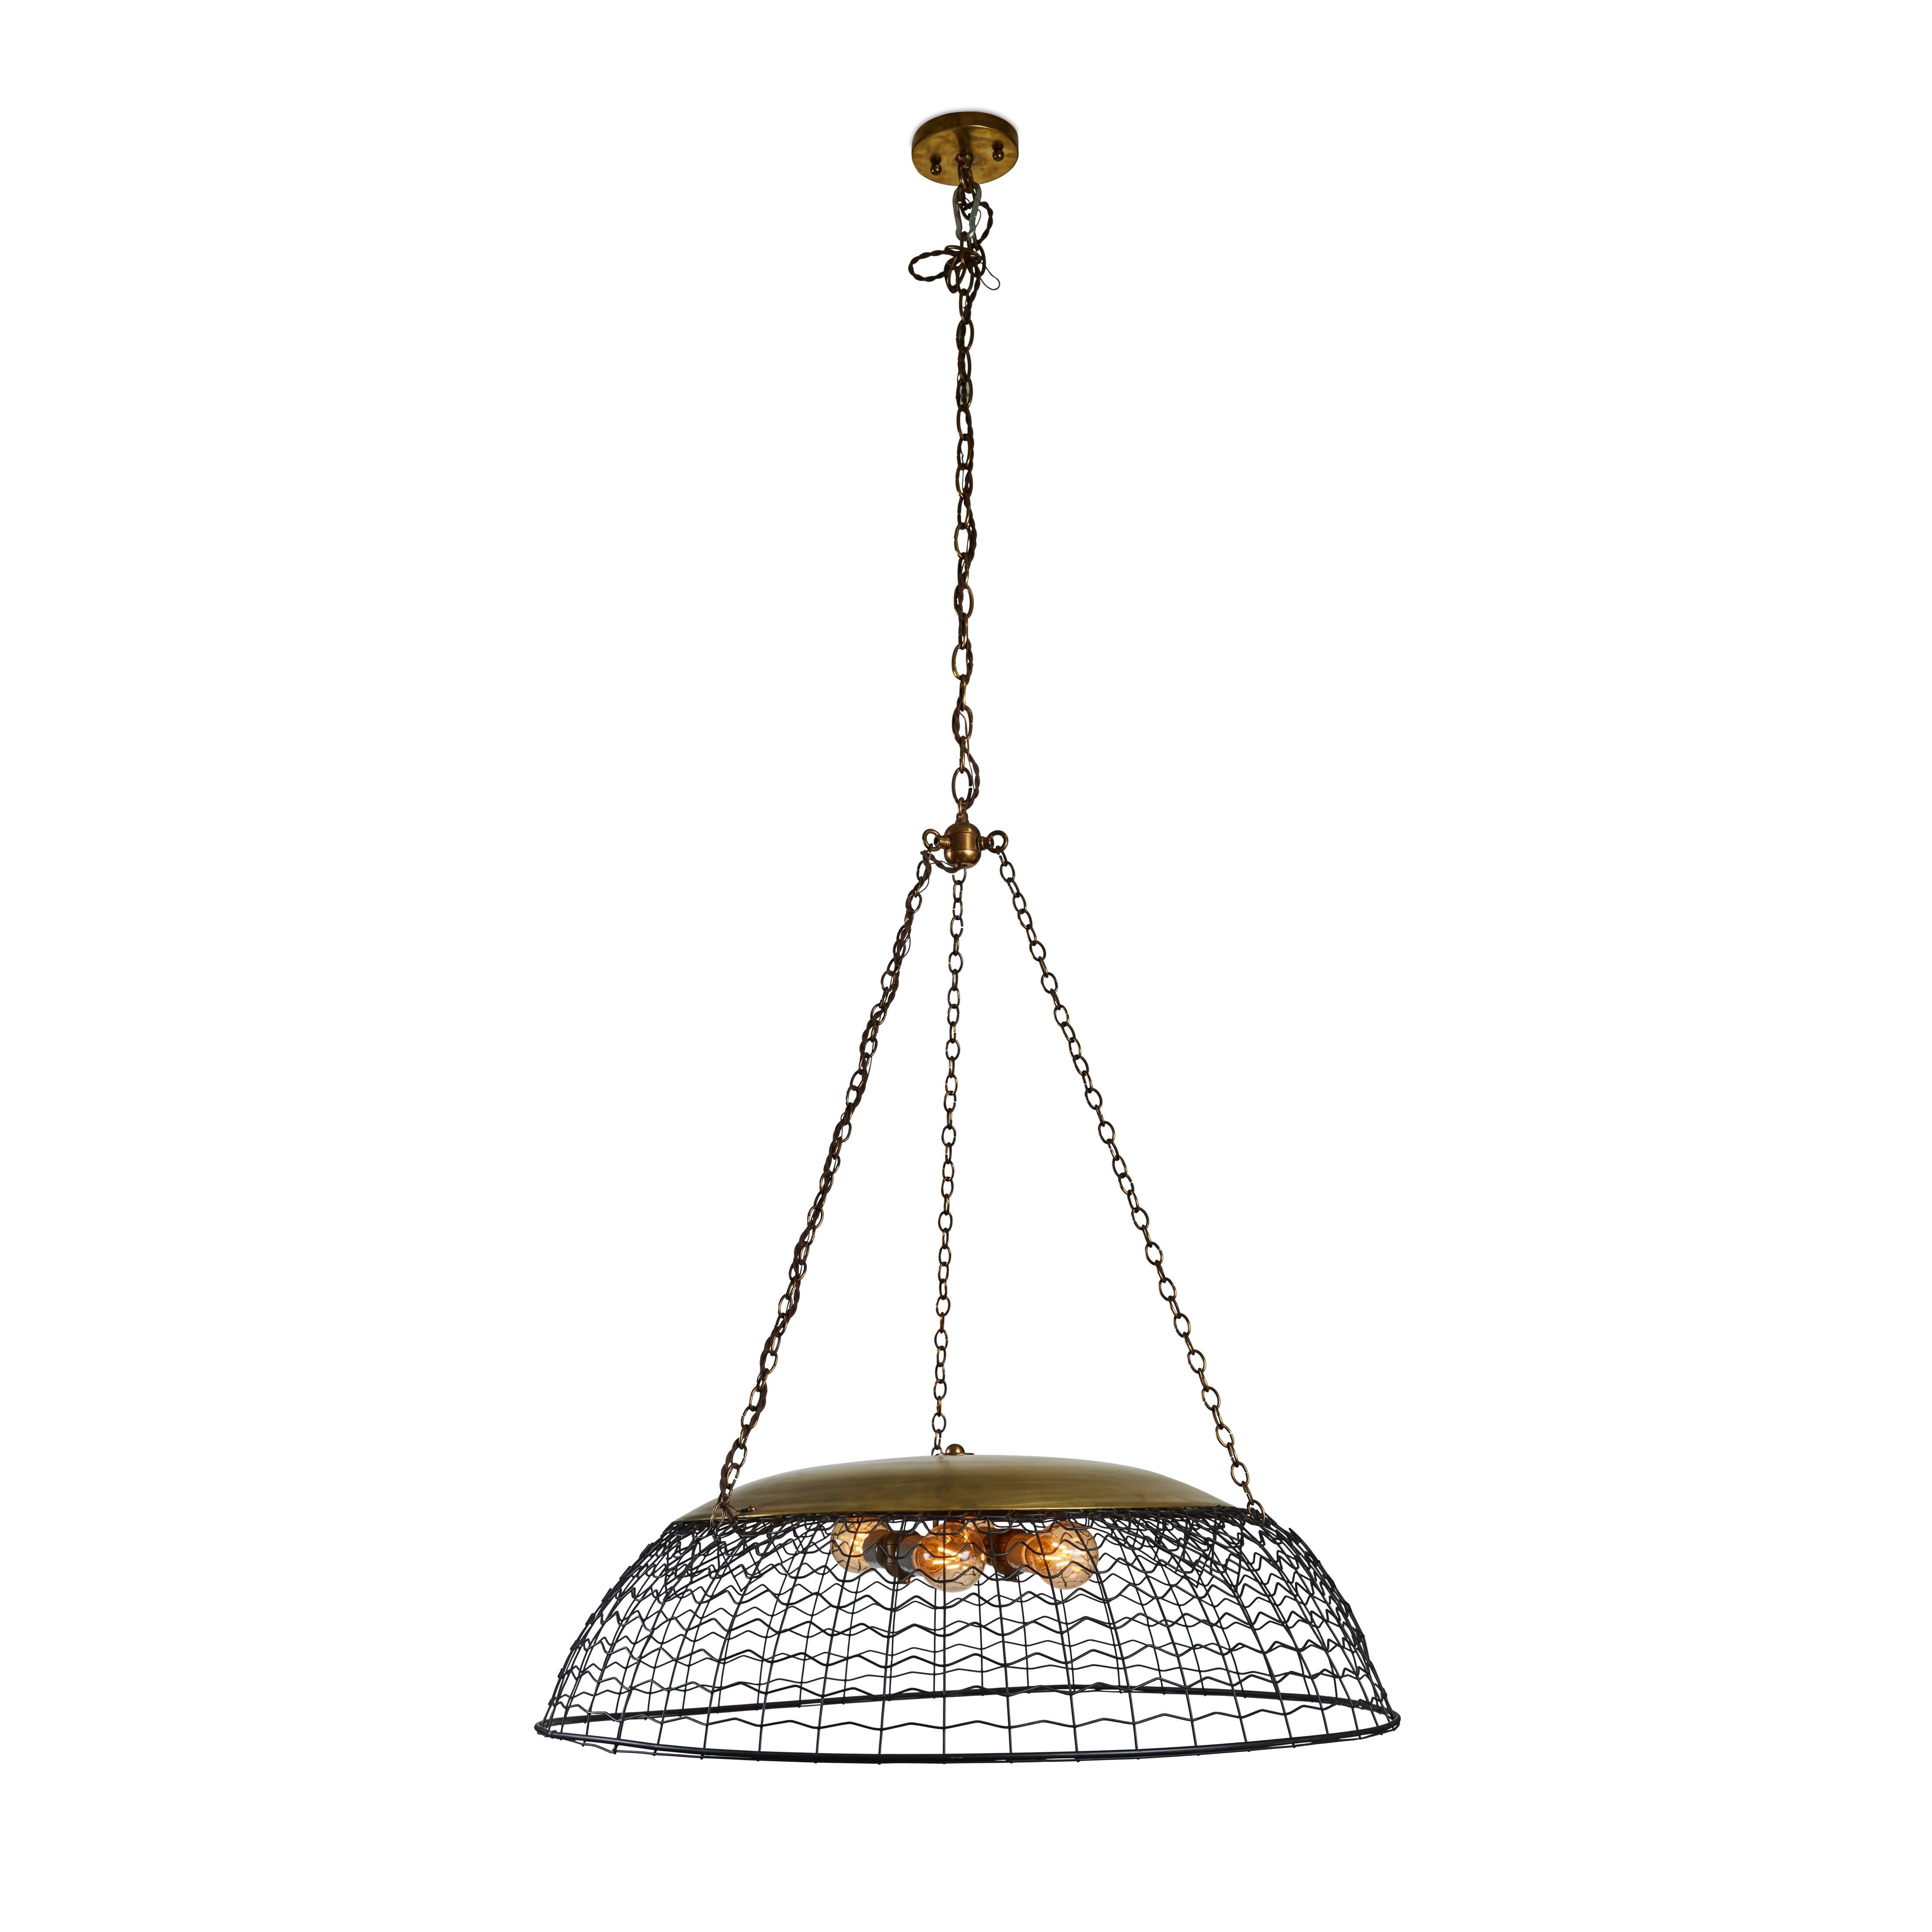 Light up the room with this fantastic vintage wire basket fixture.  It has a rich black finish and was made into a hanging piece with an antique brass cap and 3 chains held by a toggle connector. It has been newly wired and holds 4 bulbs.

It